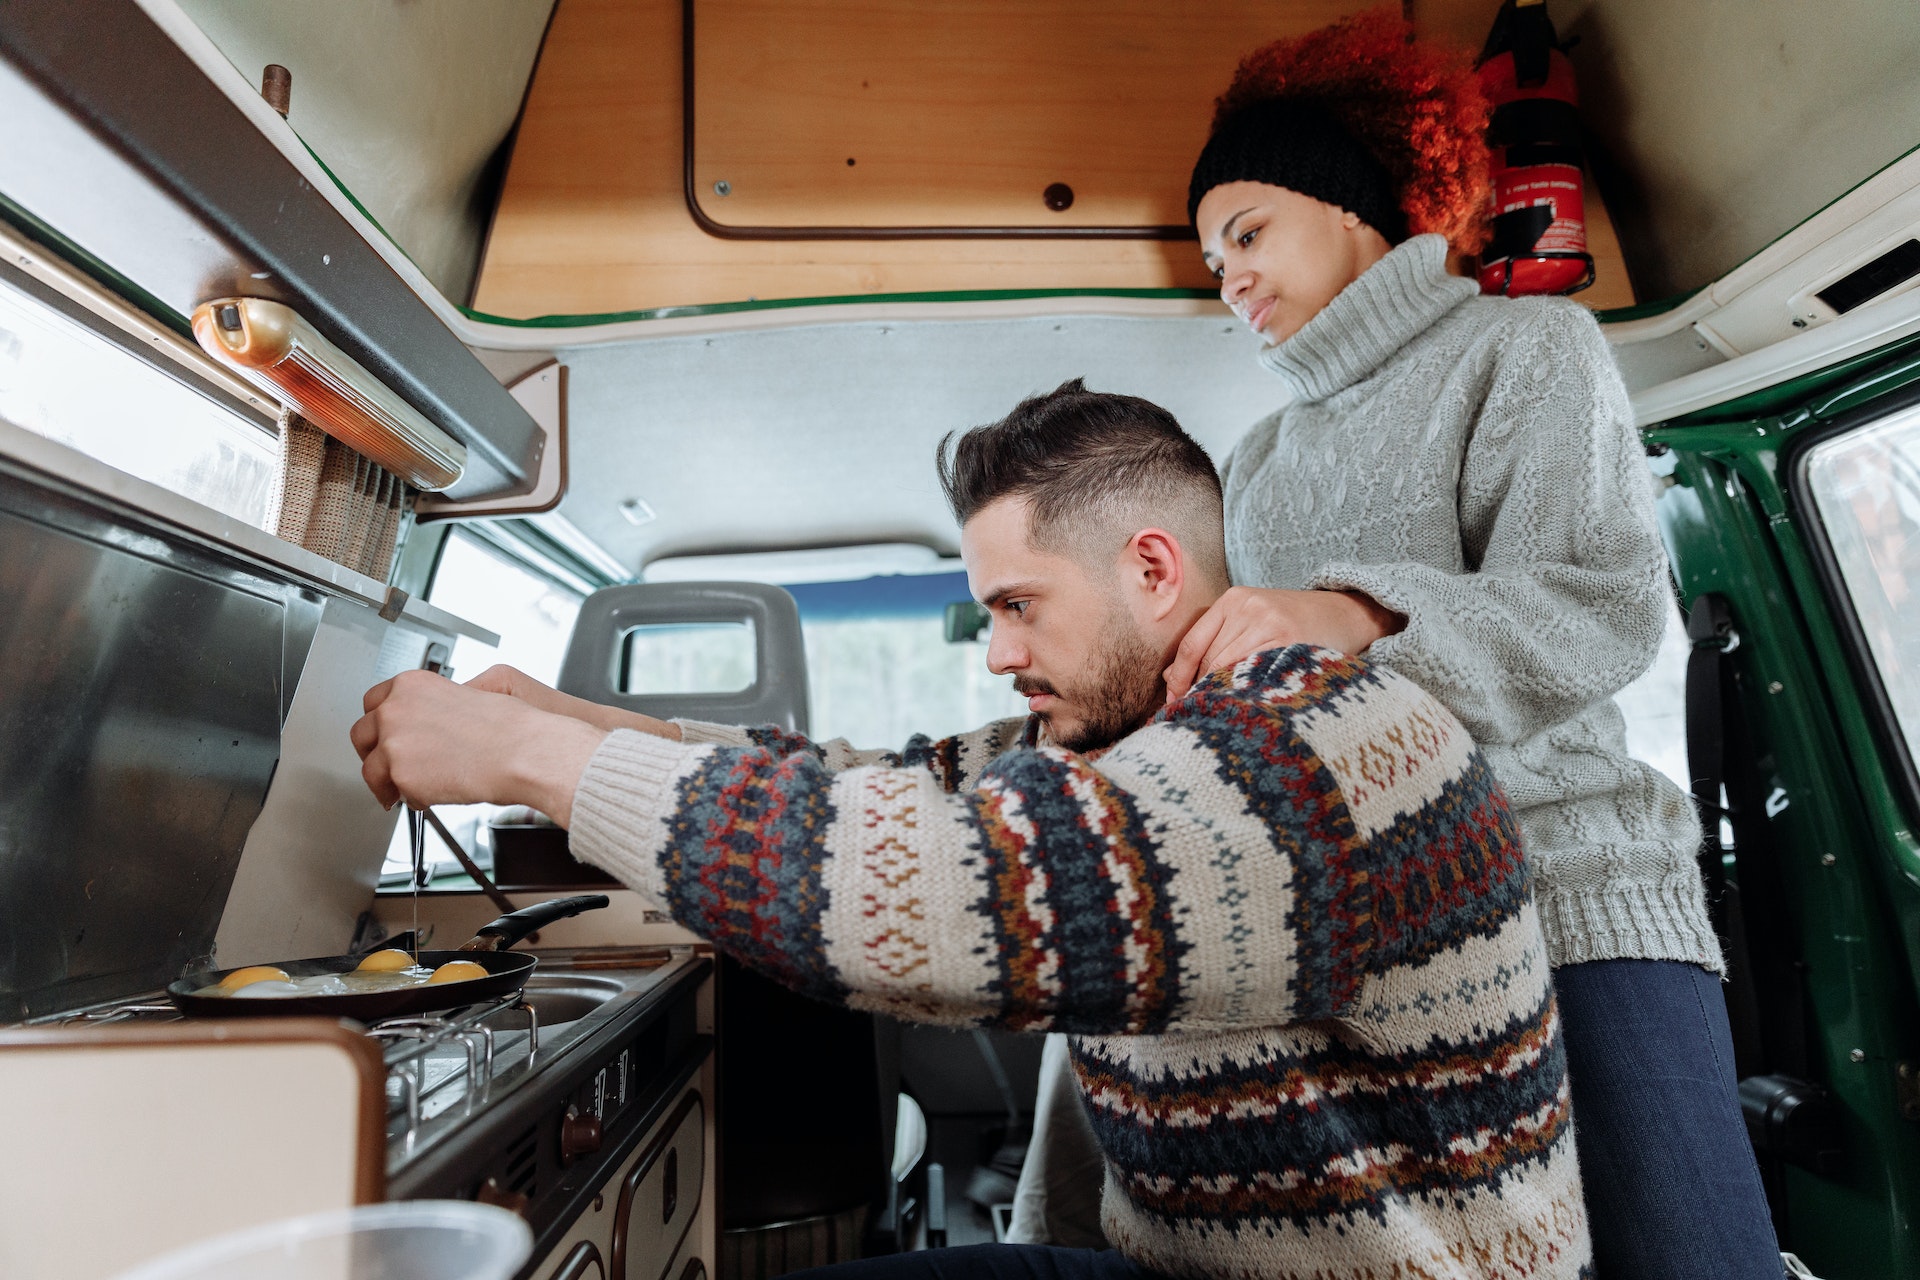 Man and woman cooking an egg on stove in camper